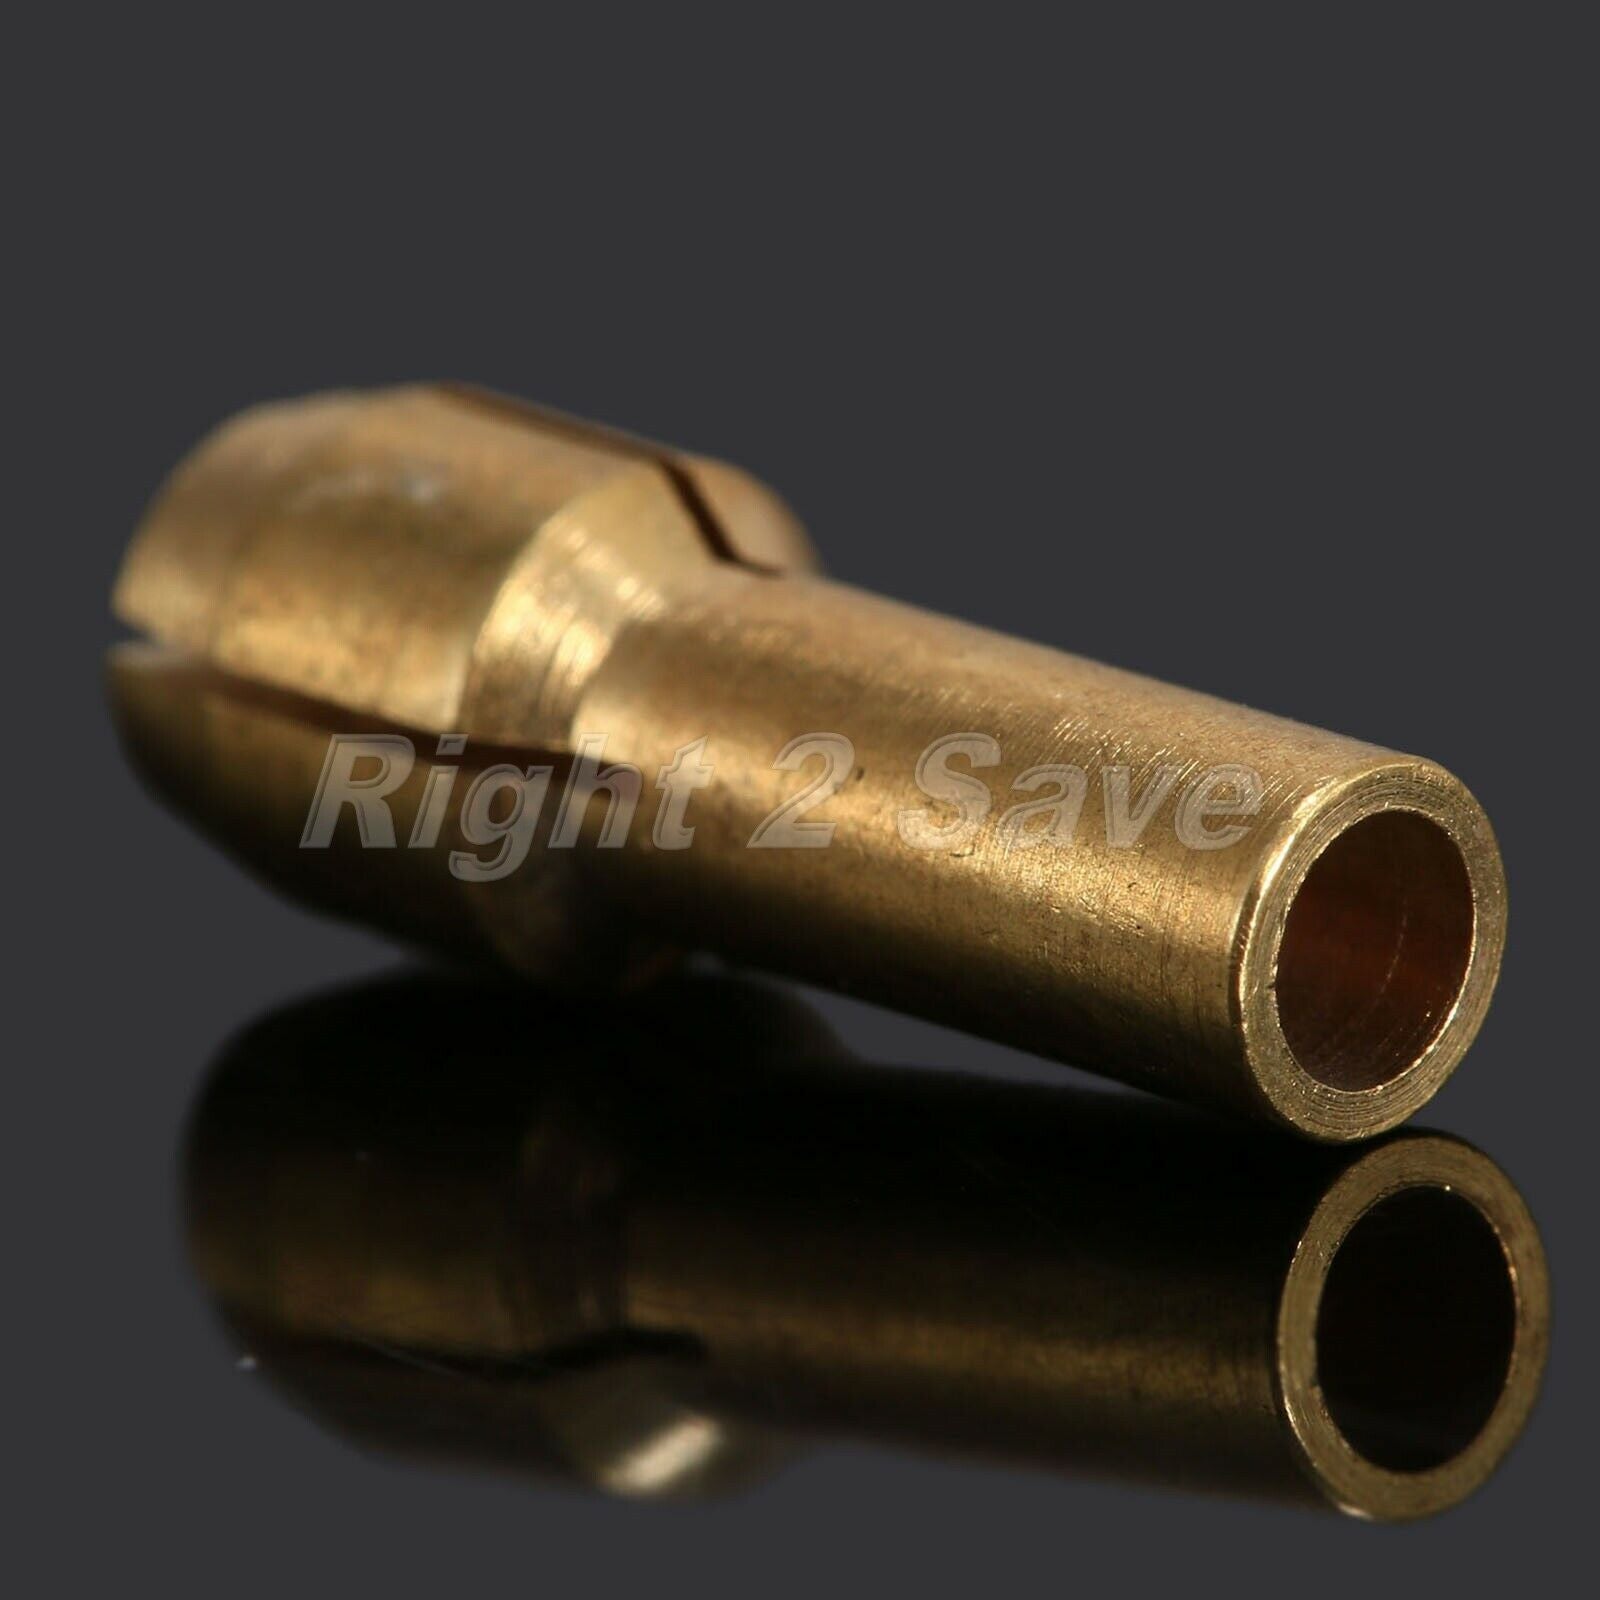 0.5mm-3.2mm Brass Collet Bits & Long Tail Keyless Drill Chuck Rotary Tools R2S